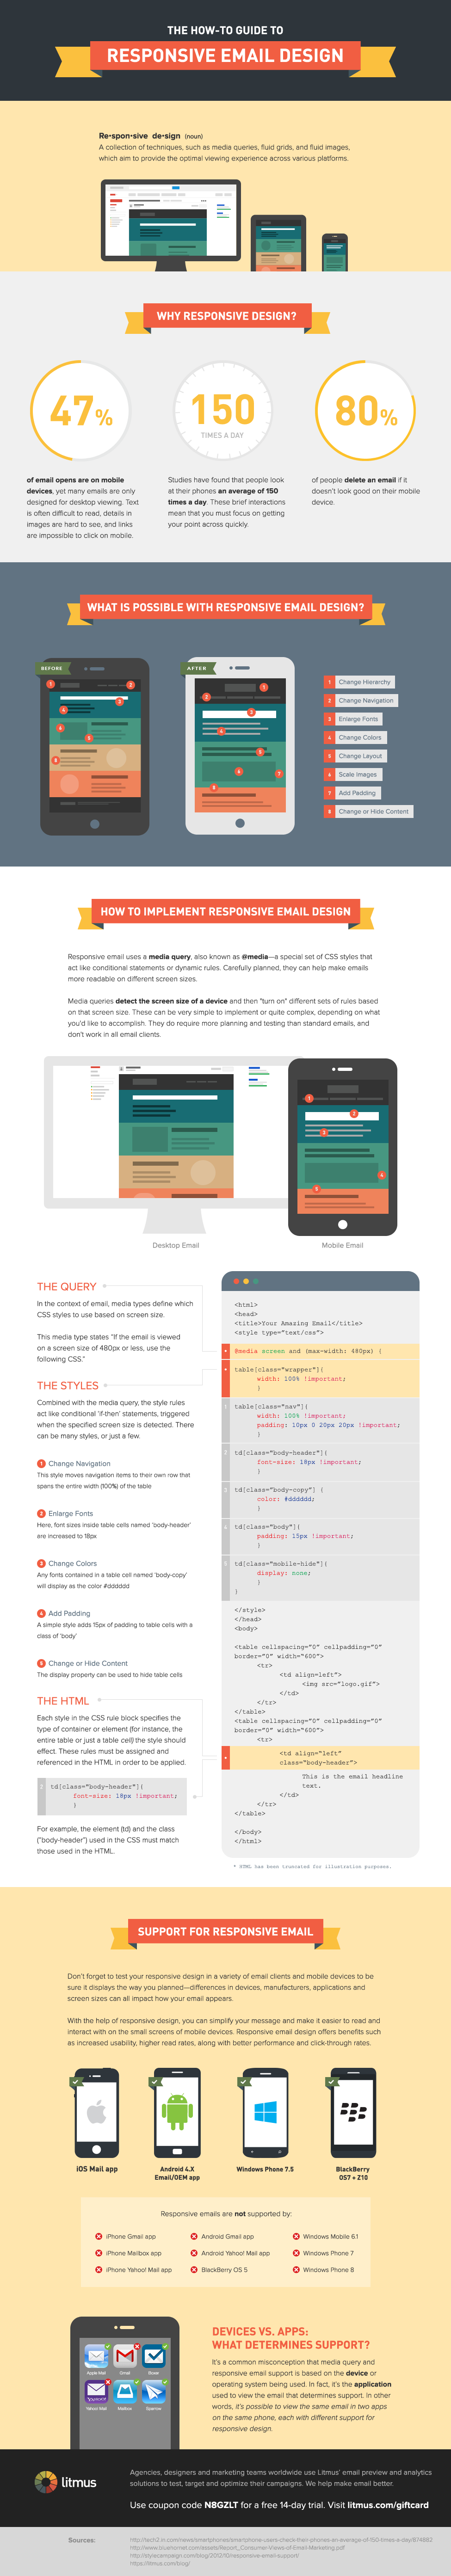 how-to-responsive-email-design-infographic.png